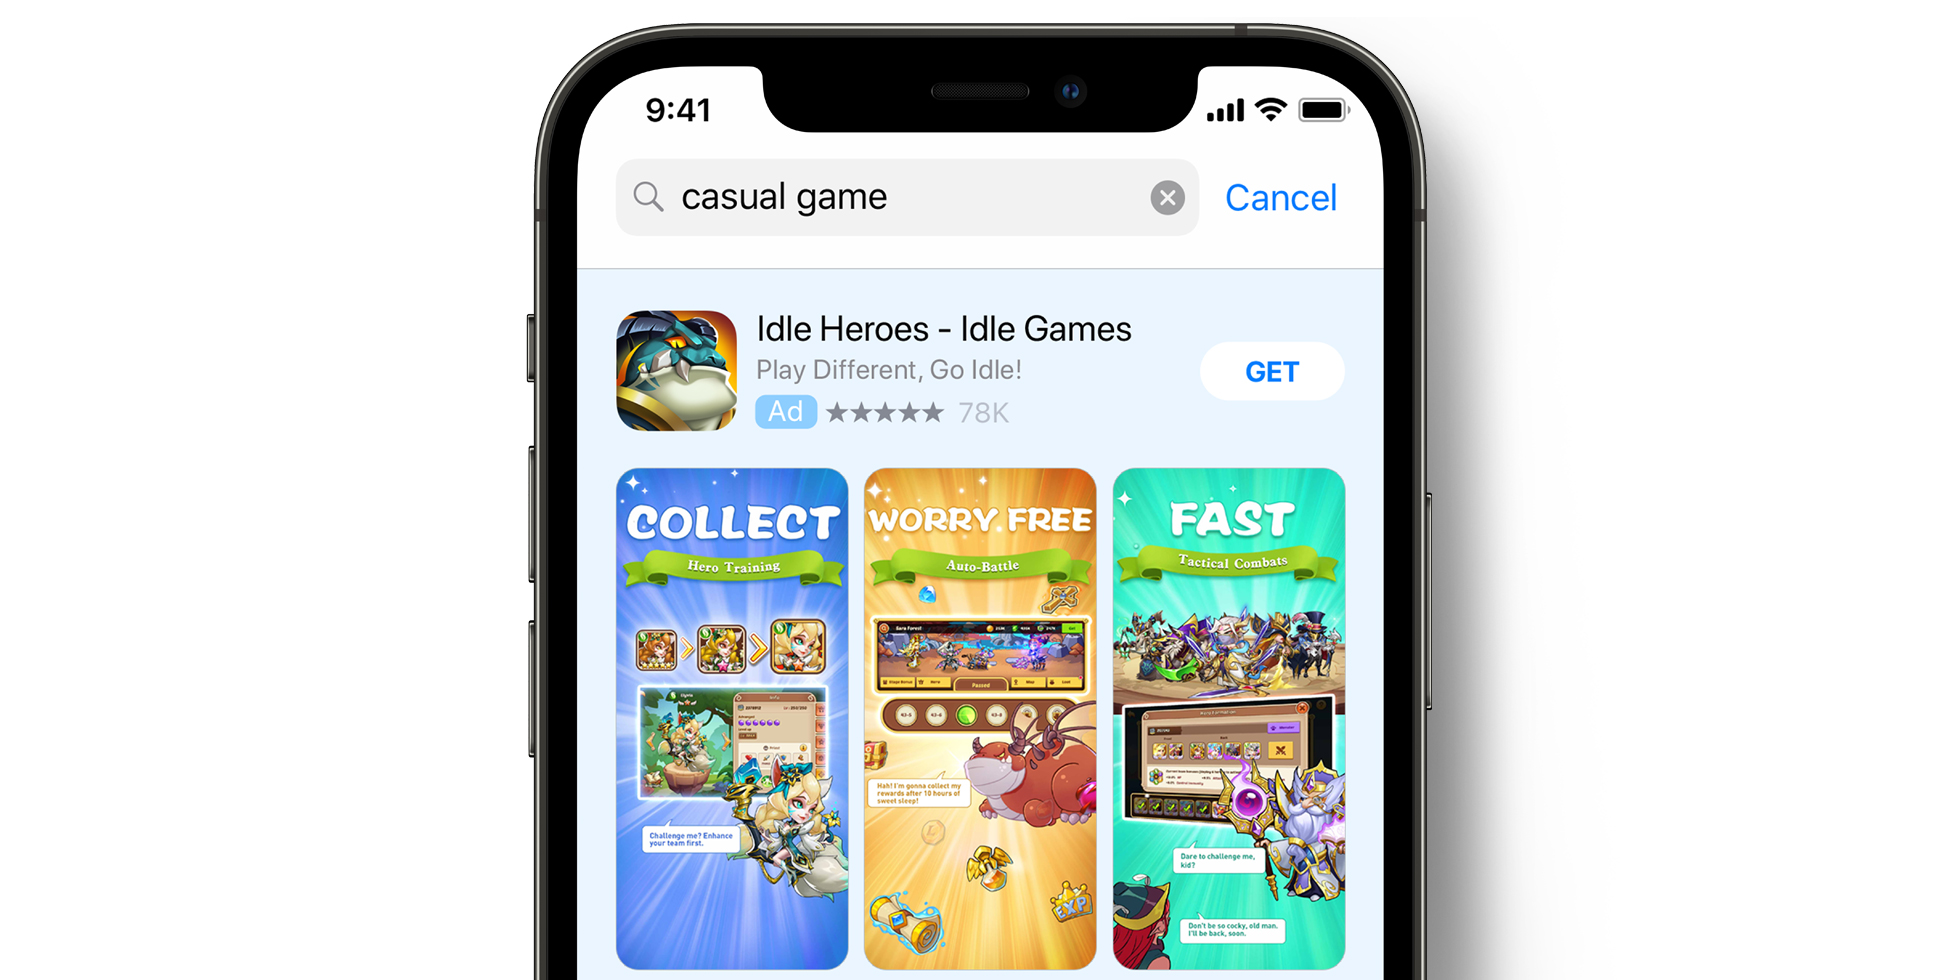 Idle Heroes Anzeige im App Store